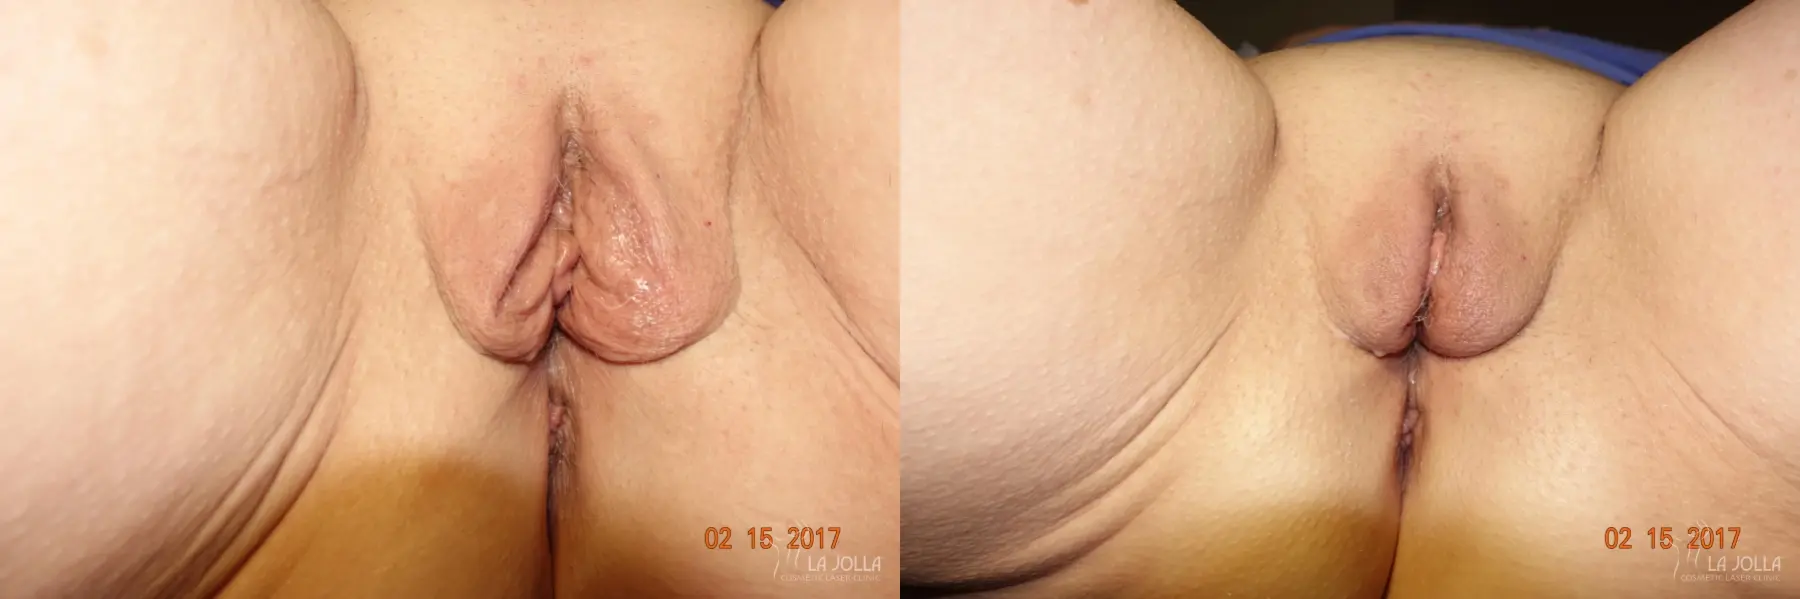 ThermiVa®: Patient 6 - Before and After  